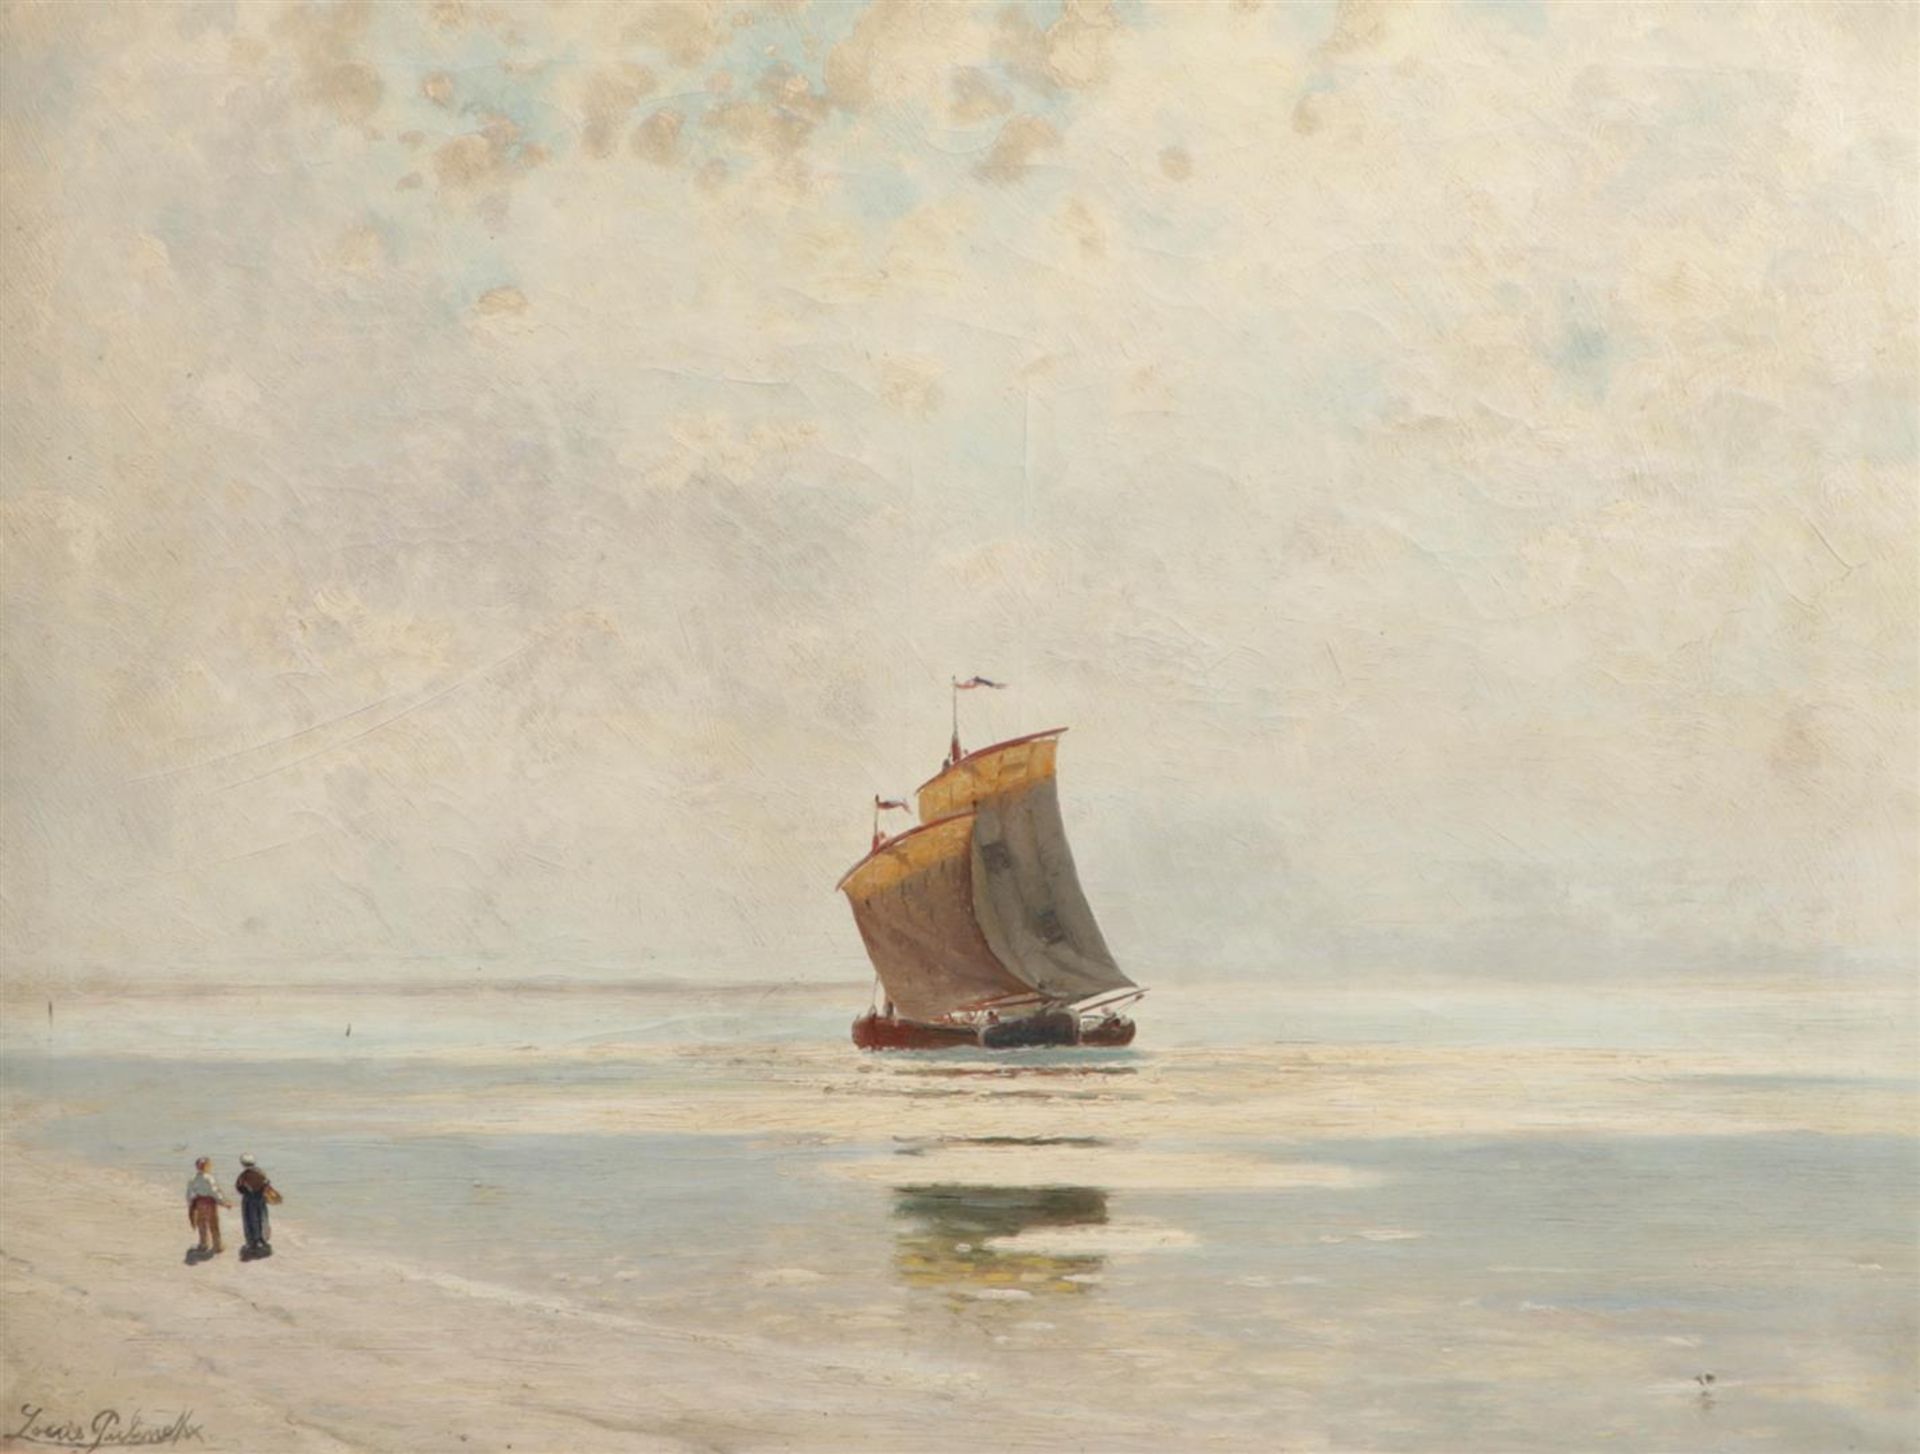 Louis Pulinkx (1843-1910), Walkers along the coast, a fishing ship at the high tide line, signed (bo